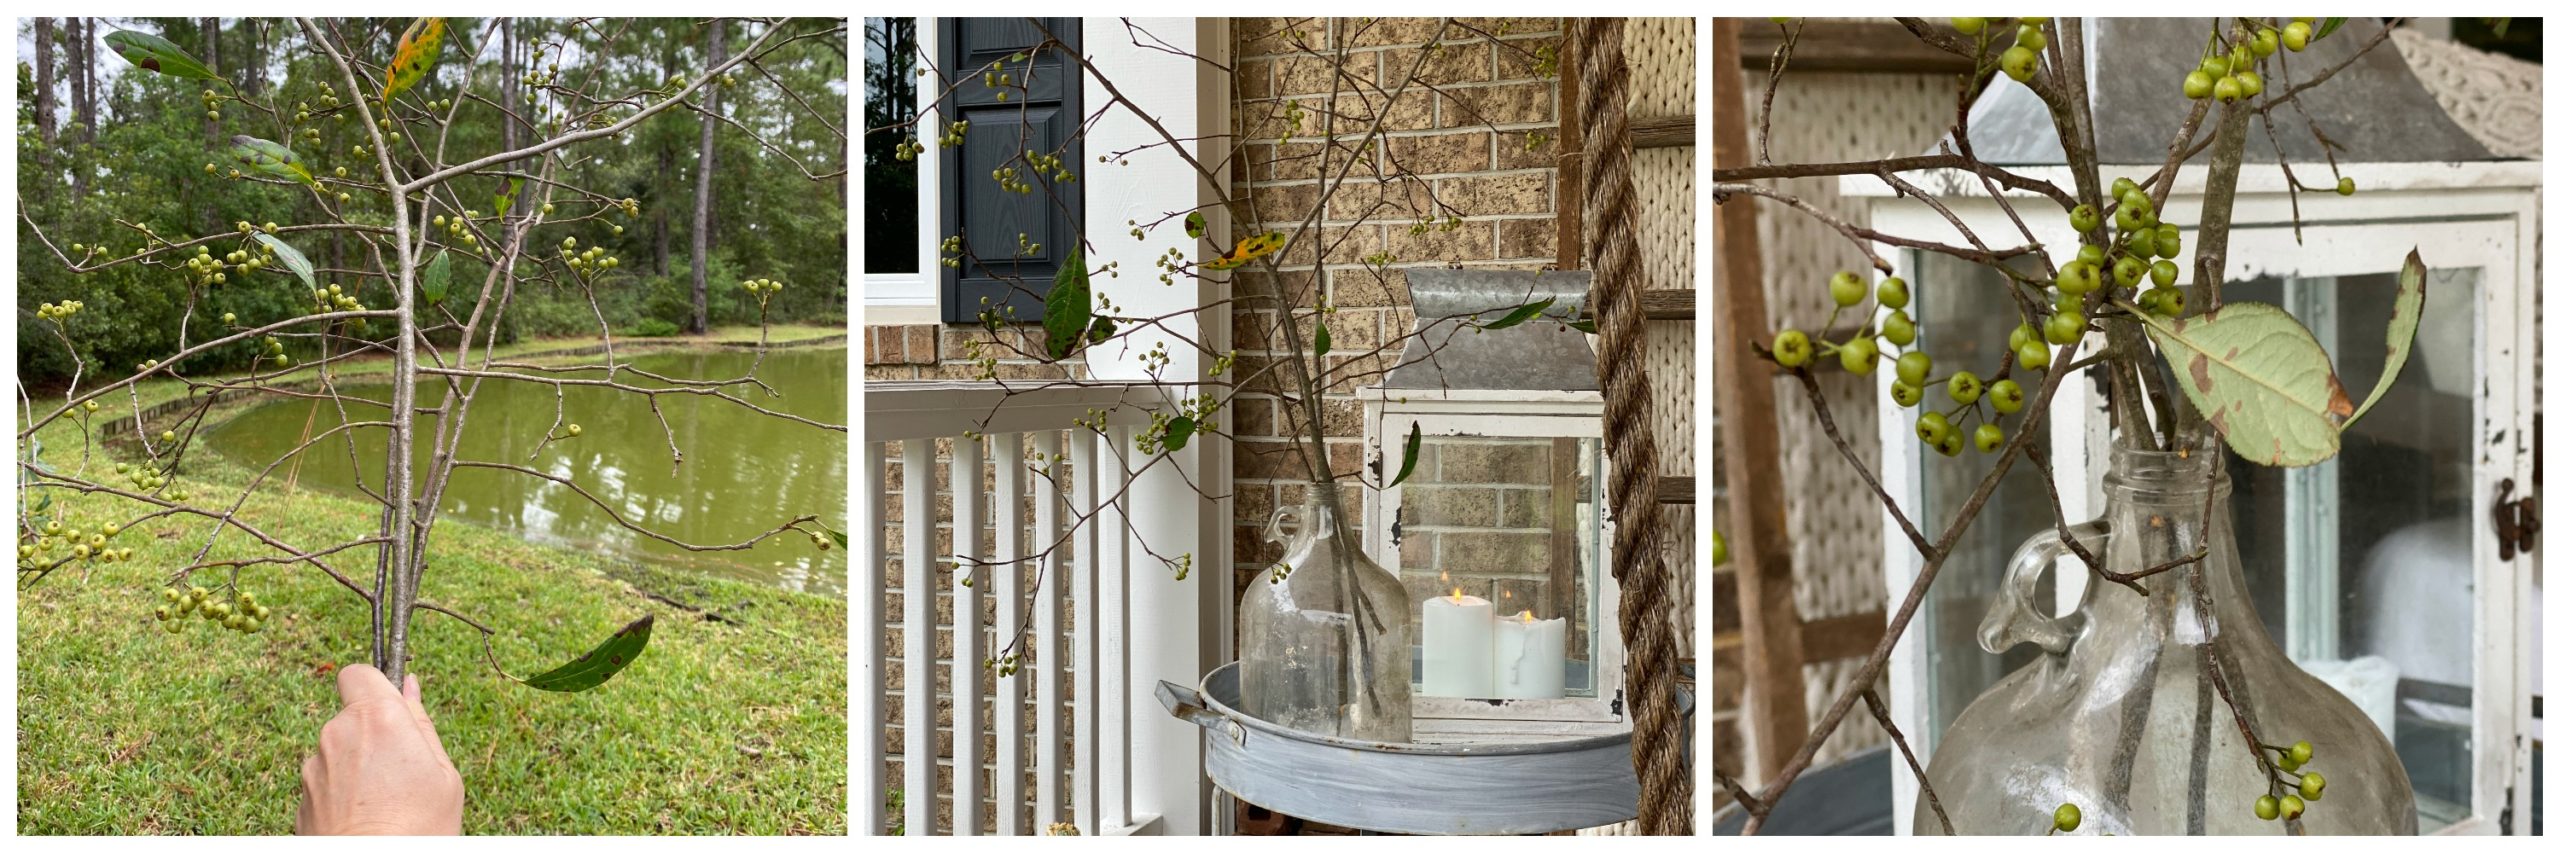 A collage of three photos. The first photo is a hand holding Fall branches in front of a pond. The second photo is the branches arranged in a glass jug on a metal table with a white lantern. The third photo is a close up of the branches in a glass jug.